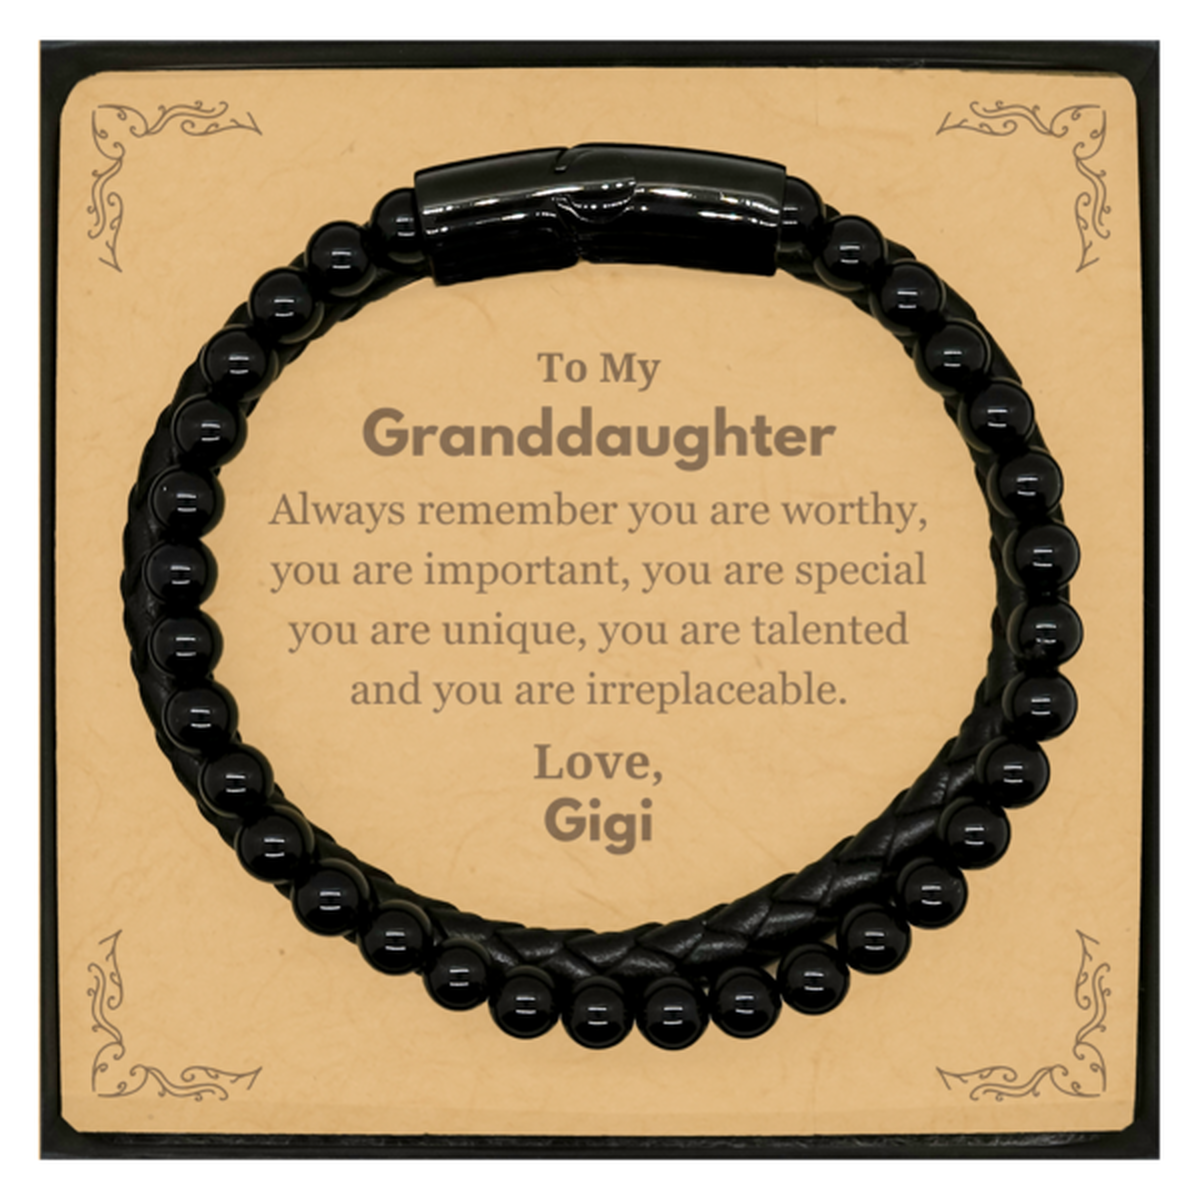 Granddaughter Birthday Gifts from Gigi, Inspirational Stone Leather Bracelets for Granddaughter Christmas Graduation Gifts for Granddaughter Always remember you are worthy, you are important. Love, Gigi